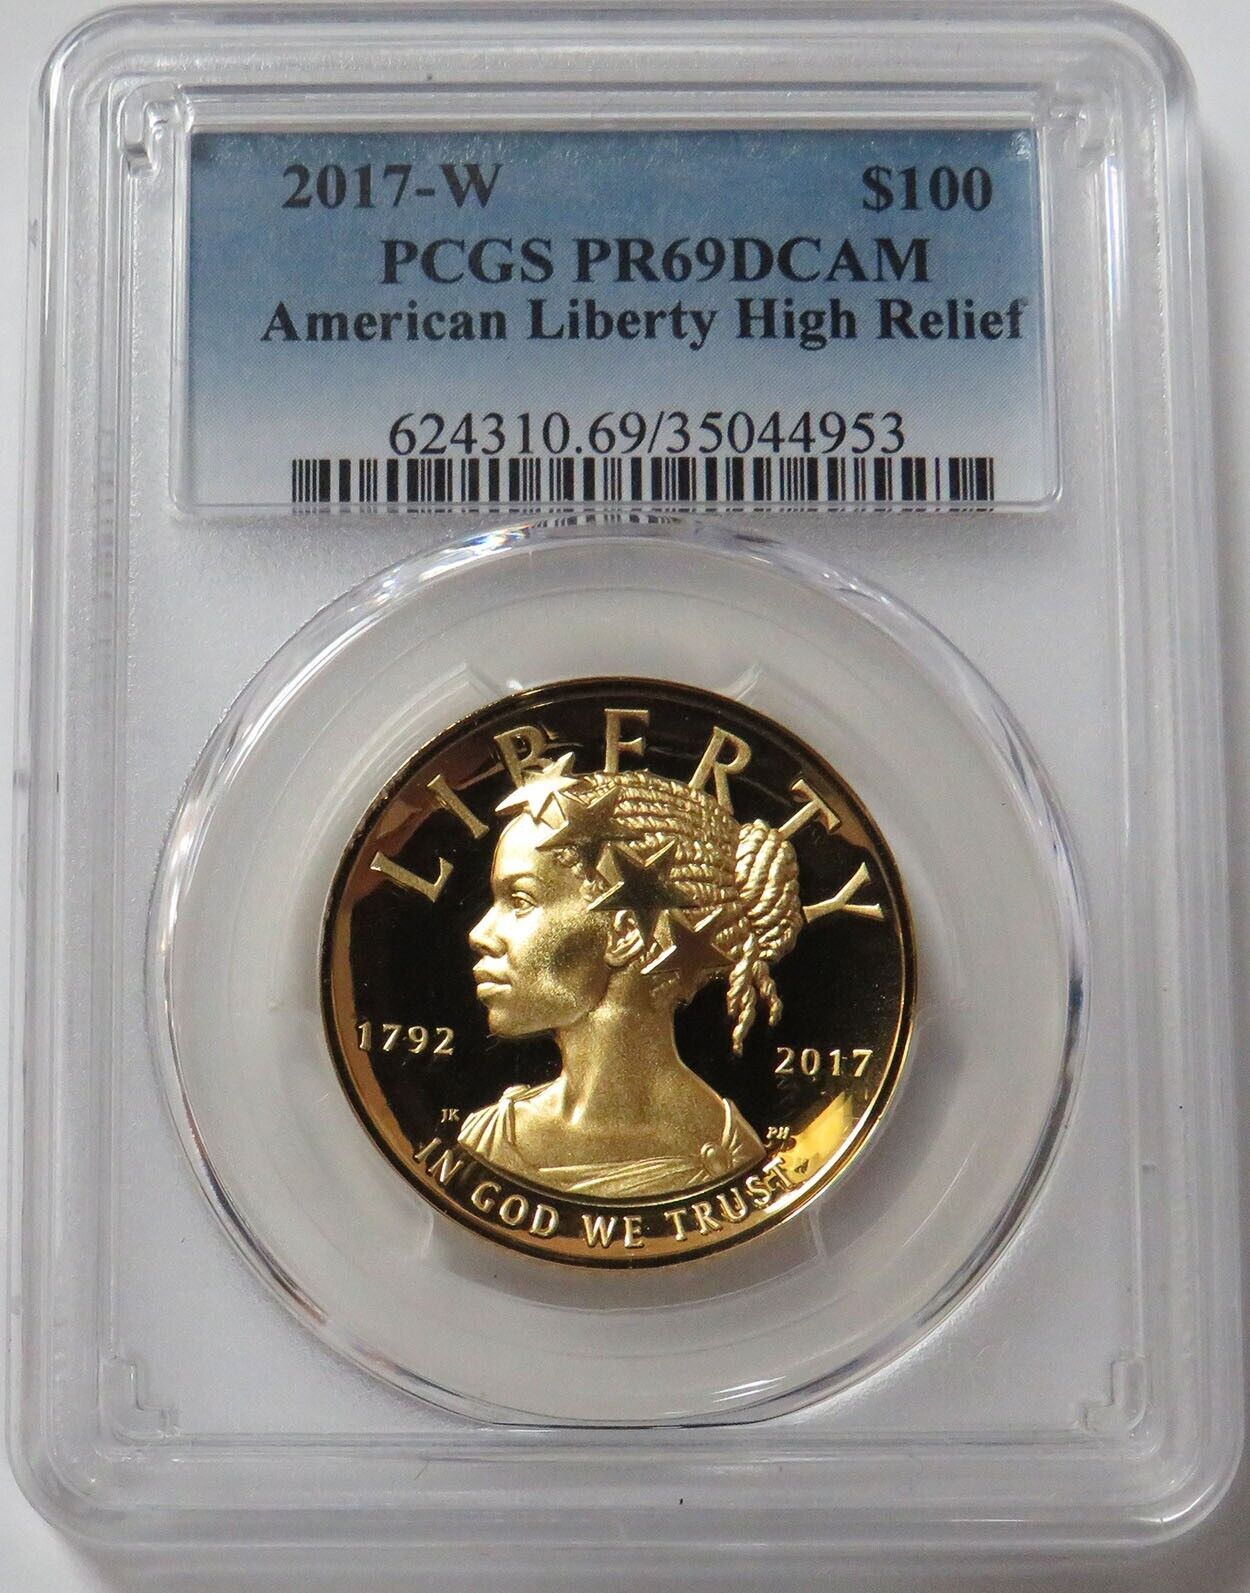 PCGS Graded Coins – tagged 